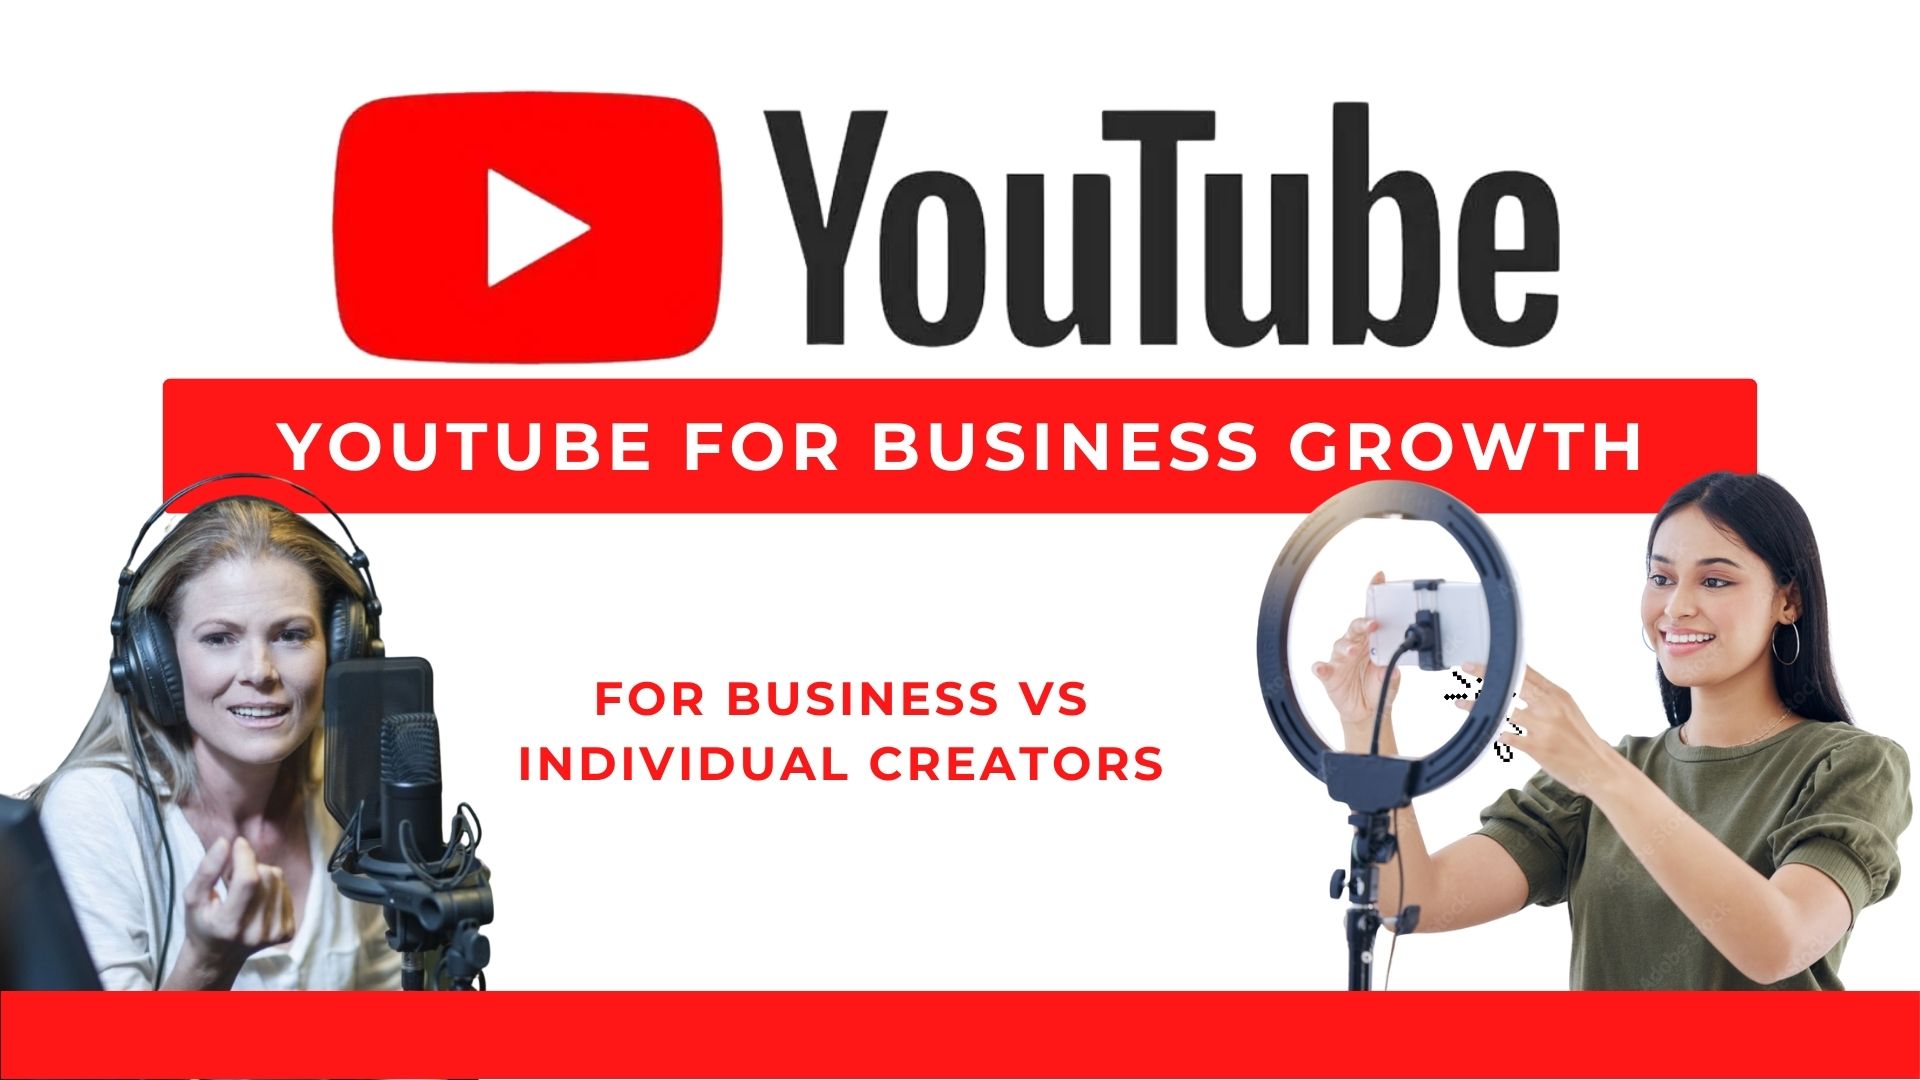 YouTube as a Business